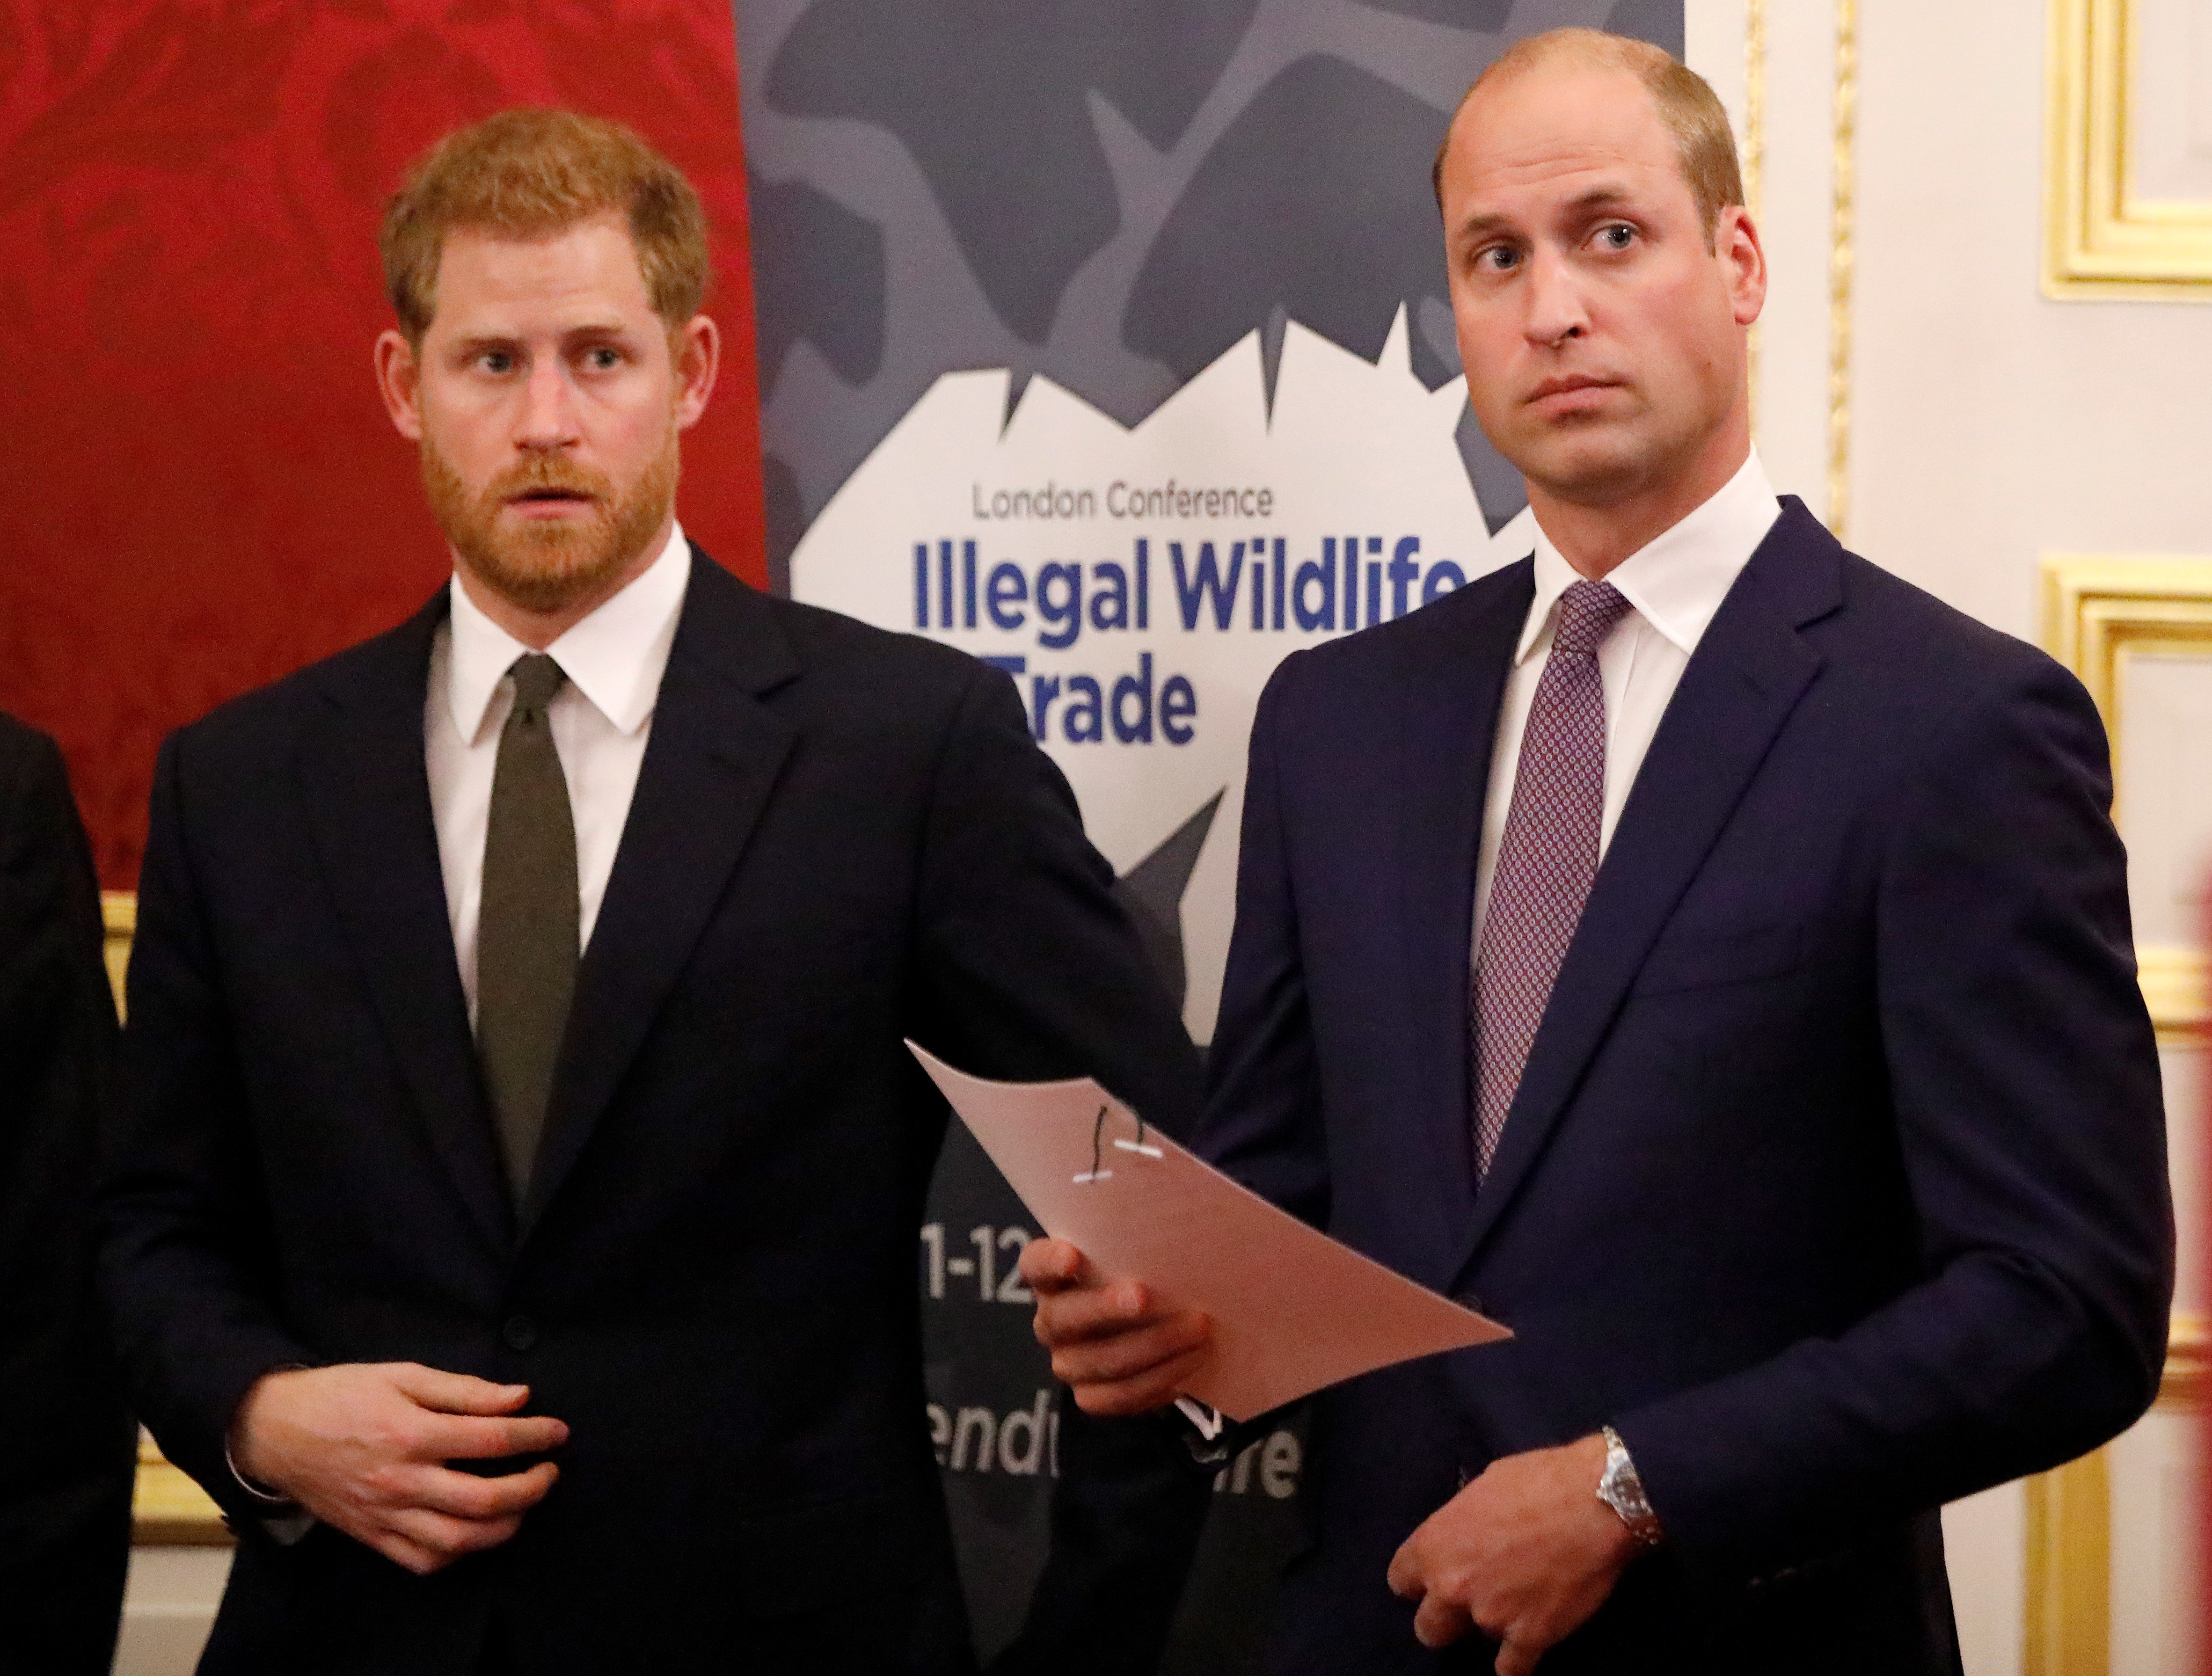 Prince William, Duke of Cambridge (R) and Prince Harry, Duke of Sussex, host a reception to officially open the 2018 Illegal Wildlife Trade Conference at St James' Palace on October 10, 2018 in London, England. | Source: Getty Images